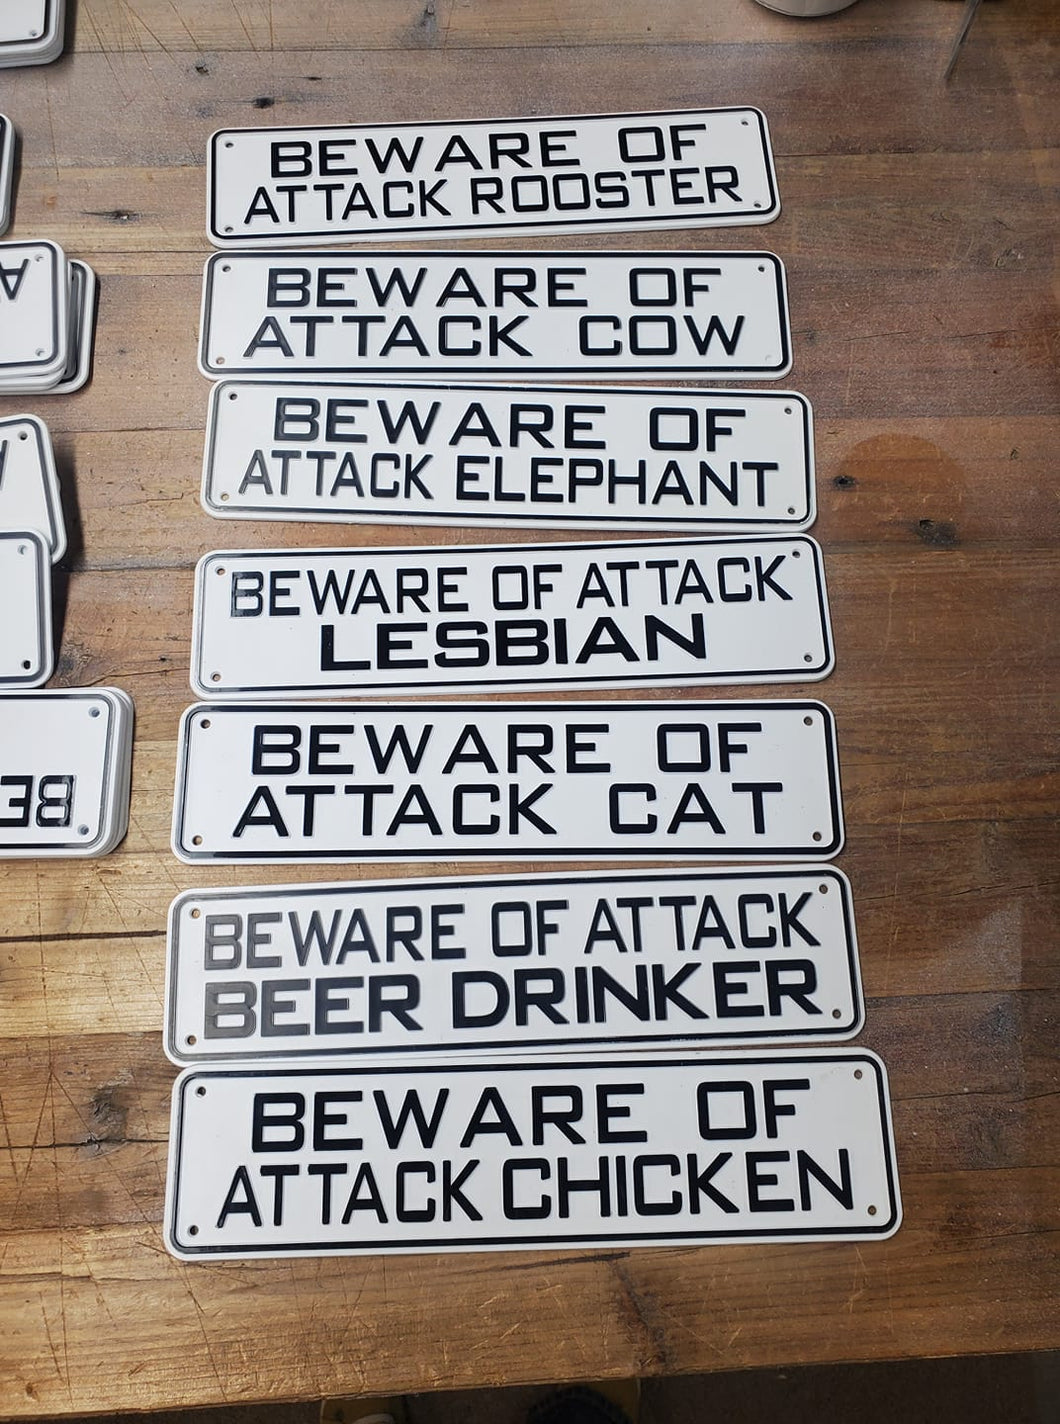 7 BEWARE OF ATTACK SIGNS ON A WOODEN TABLE. THEY ARE BLACK WORDS ON 12 INCHES LONG BY 3” HIGH WHITE METAL. SOME SAYINGS ARE ‘BEWARE OF ATTACK ROOSTER, COW, ELEPHANT, CAT, CHICKEN, MOSQUITO, MUSICIAN, GARDNER,NO PEEING,KEEP OUT